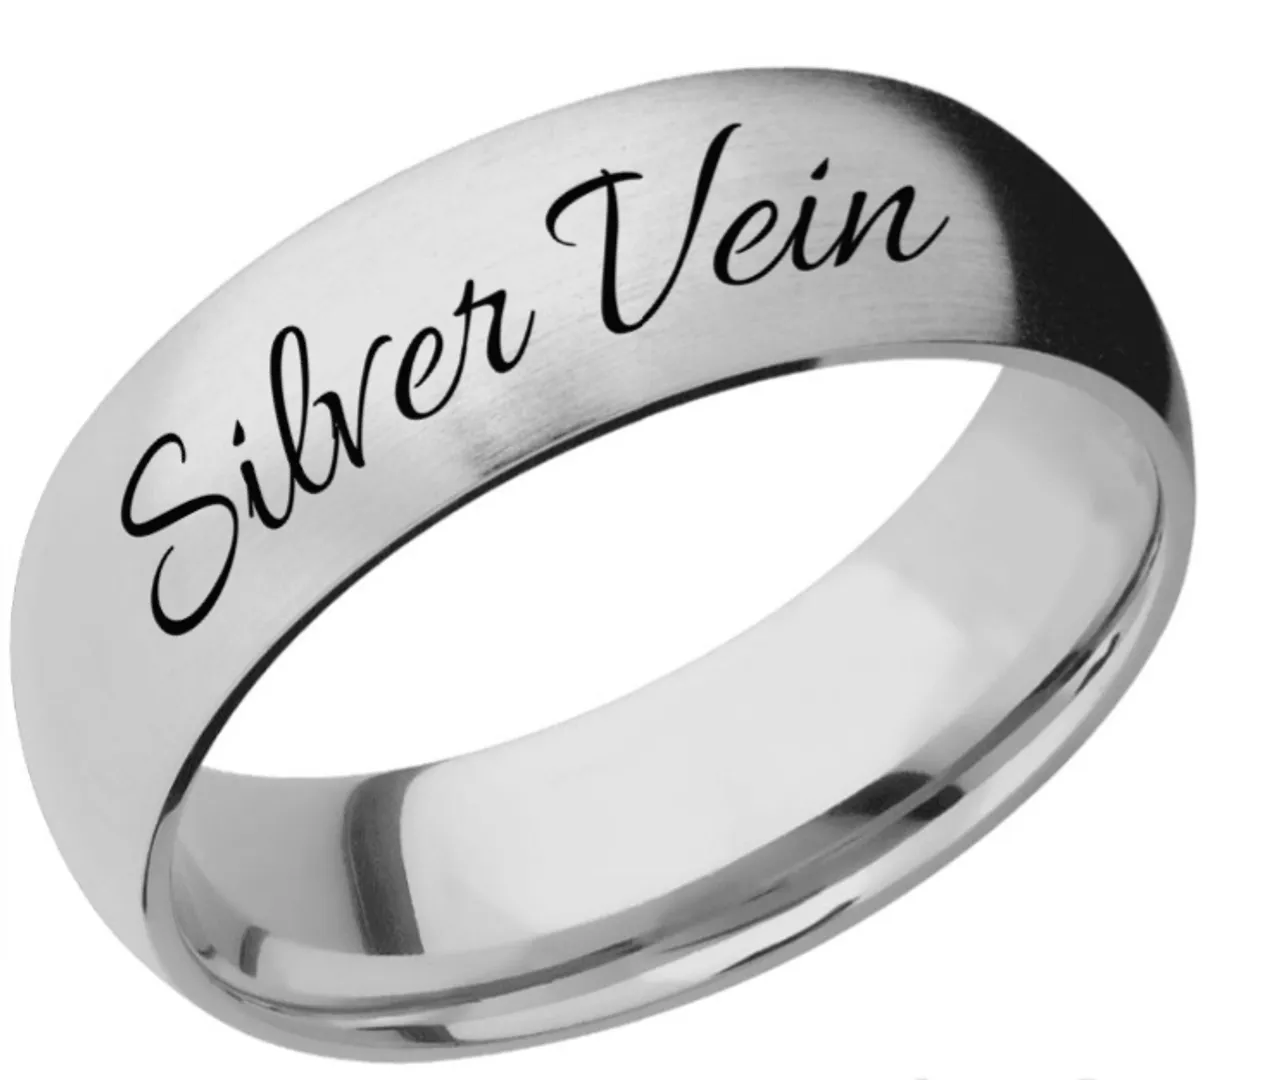 Introducing Silver Vein jewelry.

Order your Silver Vein jewelry today. 

These are custom one-off pieces that are designed to bring out your inner sexy beast.

Listen, ladies, men want a freak in the sheets and a lady in the street so if all you classy ladies here on Entre want to look and feel like a porn star yet maintain that sense of class and elegance, we damned well got you!

We offer the perfect selection of jewelry and you can get yourself a one-of-a-kind custom piece delivered to your door today!

What the hell are you waiting for?

Get your credit card ready.

Call Pimp Daddy Dean at 605-801-0449 or email silverveinofficial@gmail.com and we will process your order immediately.

Daddy Dean loves all his hoes and those who order today using this special Entre code "SV 2.0" will get a 20% discount on their first order.

Your satisfaction is our mission.

Remember our motto is:

"Follow the Silver Vein to get to the Heart of Gold."

We accept all forms of payment! If it is money and it makes sense we take it.